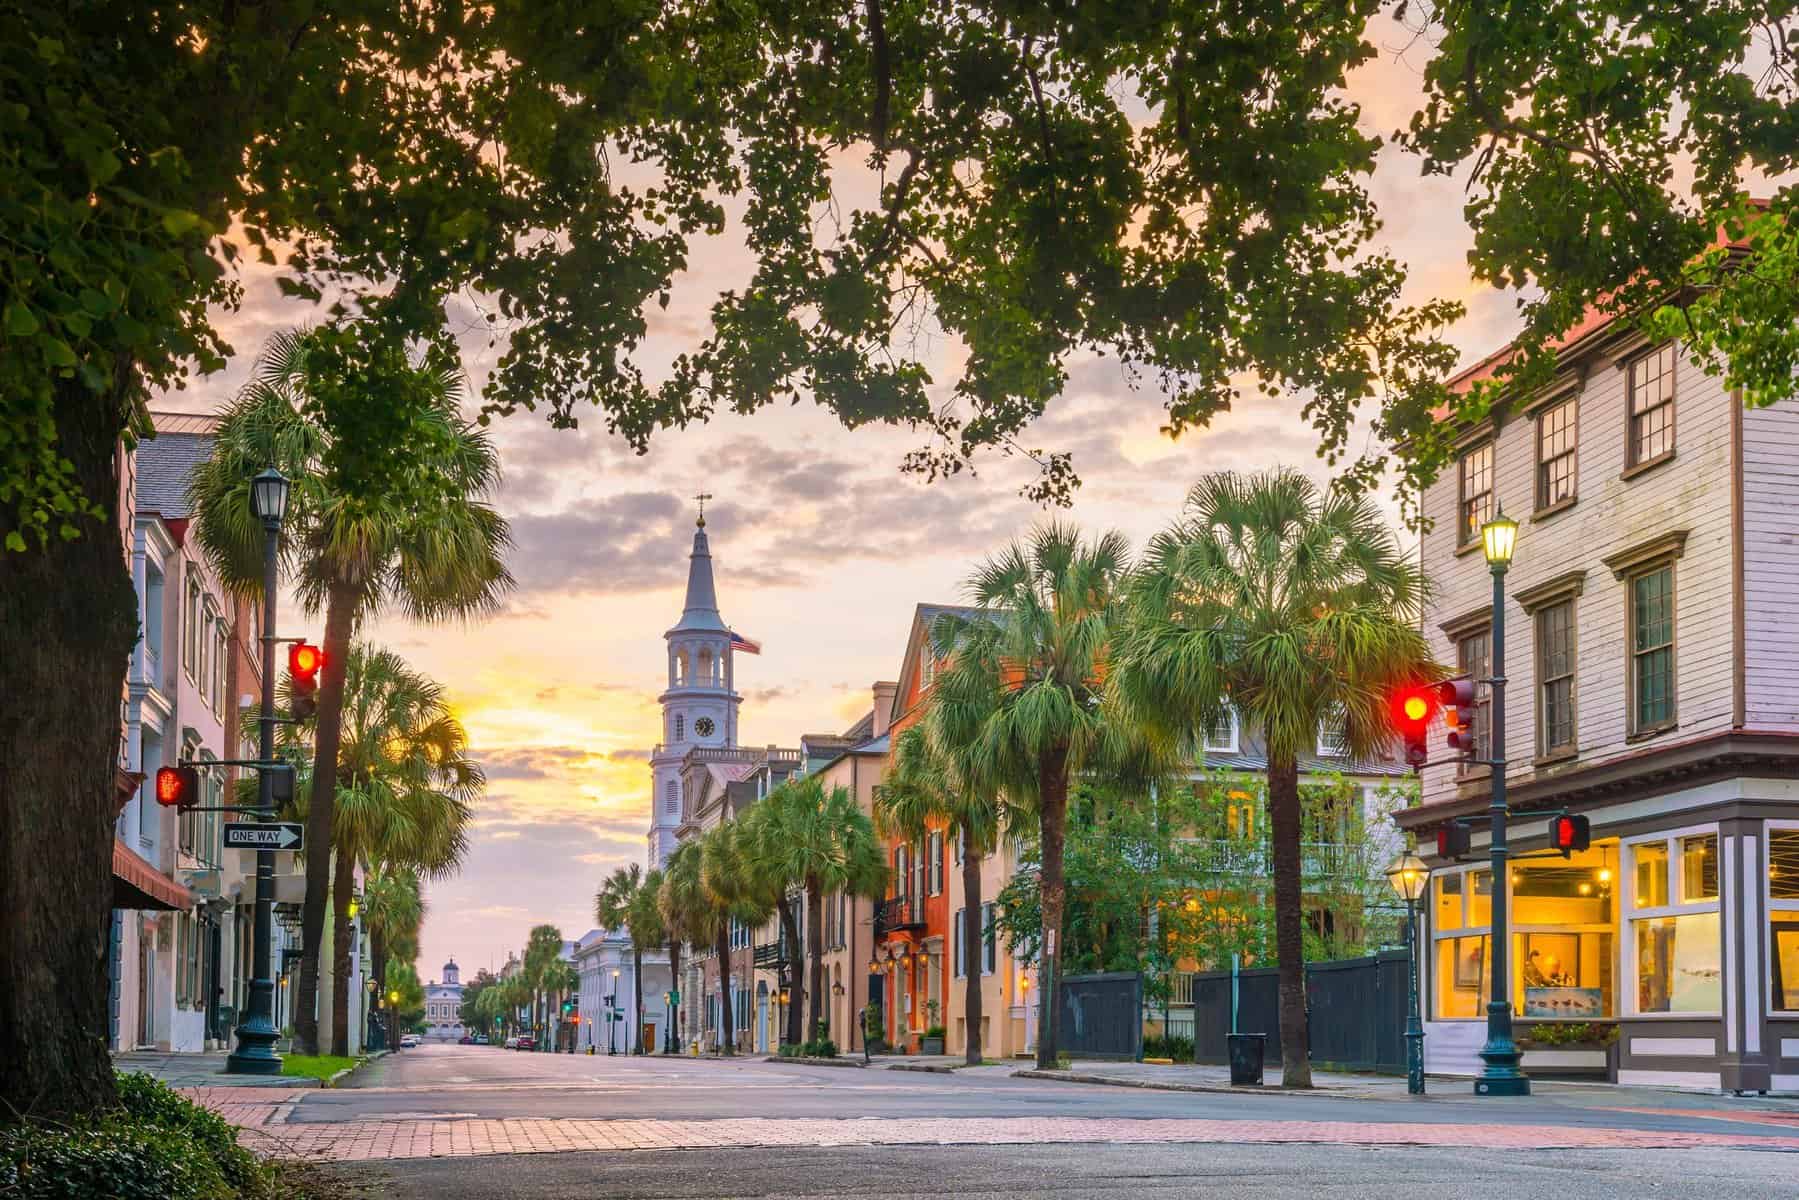 <p>Charleston is an amazing place with a great culture, beautiful buildings, and lots of great things to do and see for a girls trip! </p><p>One of the best things you can do in the city is take photos with your friends. For example, there are many colorful houses. One of the best spots in the city for this is Rainbow Row, where you can see homes in different colors. Furthermore, many photogenic spots are located in the French Quarter. </p>